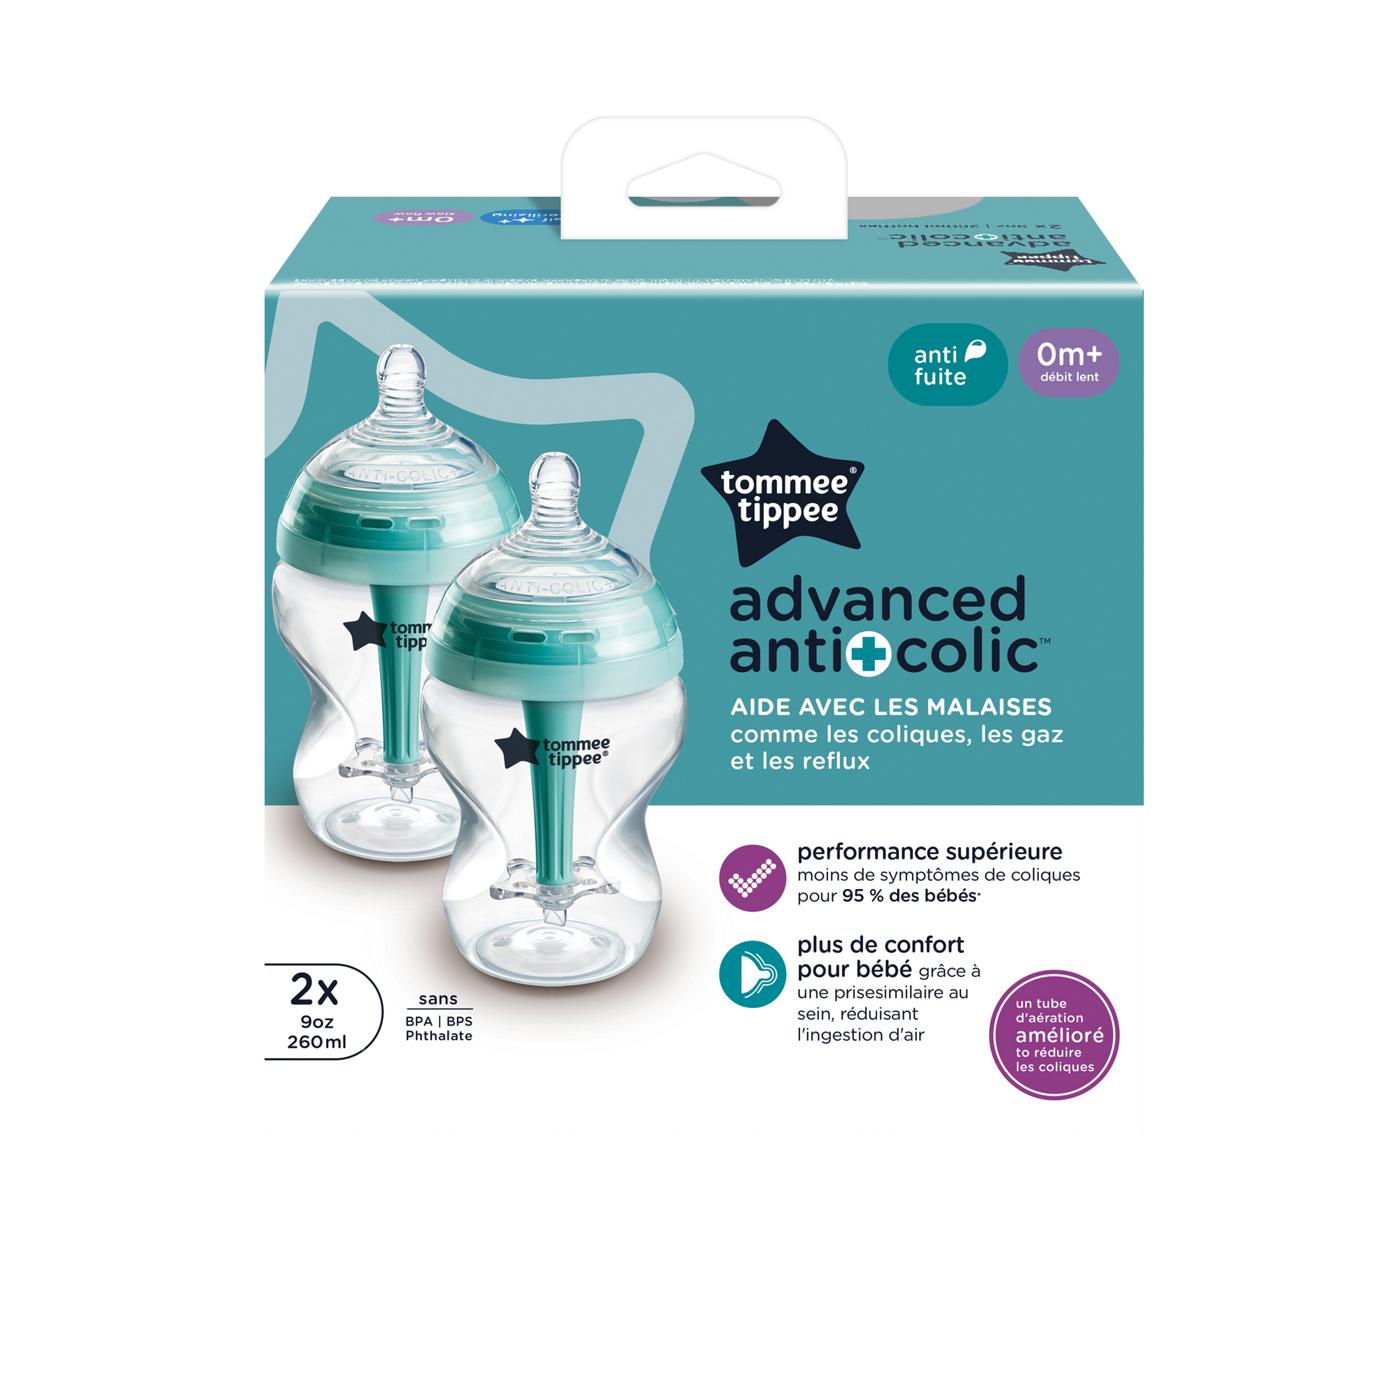 Tommee Tippee Advanced Anti-Colic Bottles; image 3 of 3